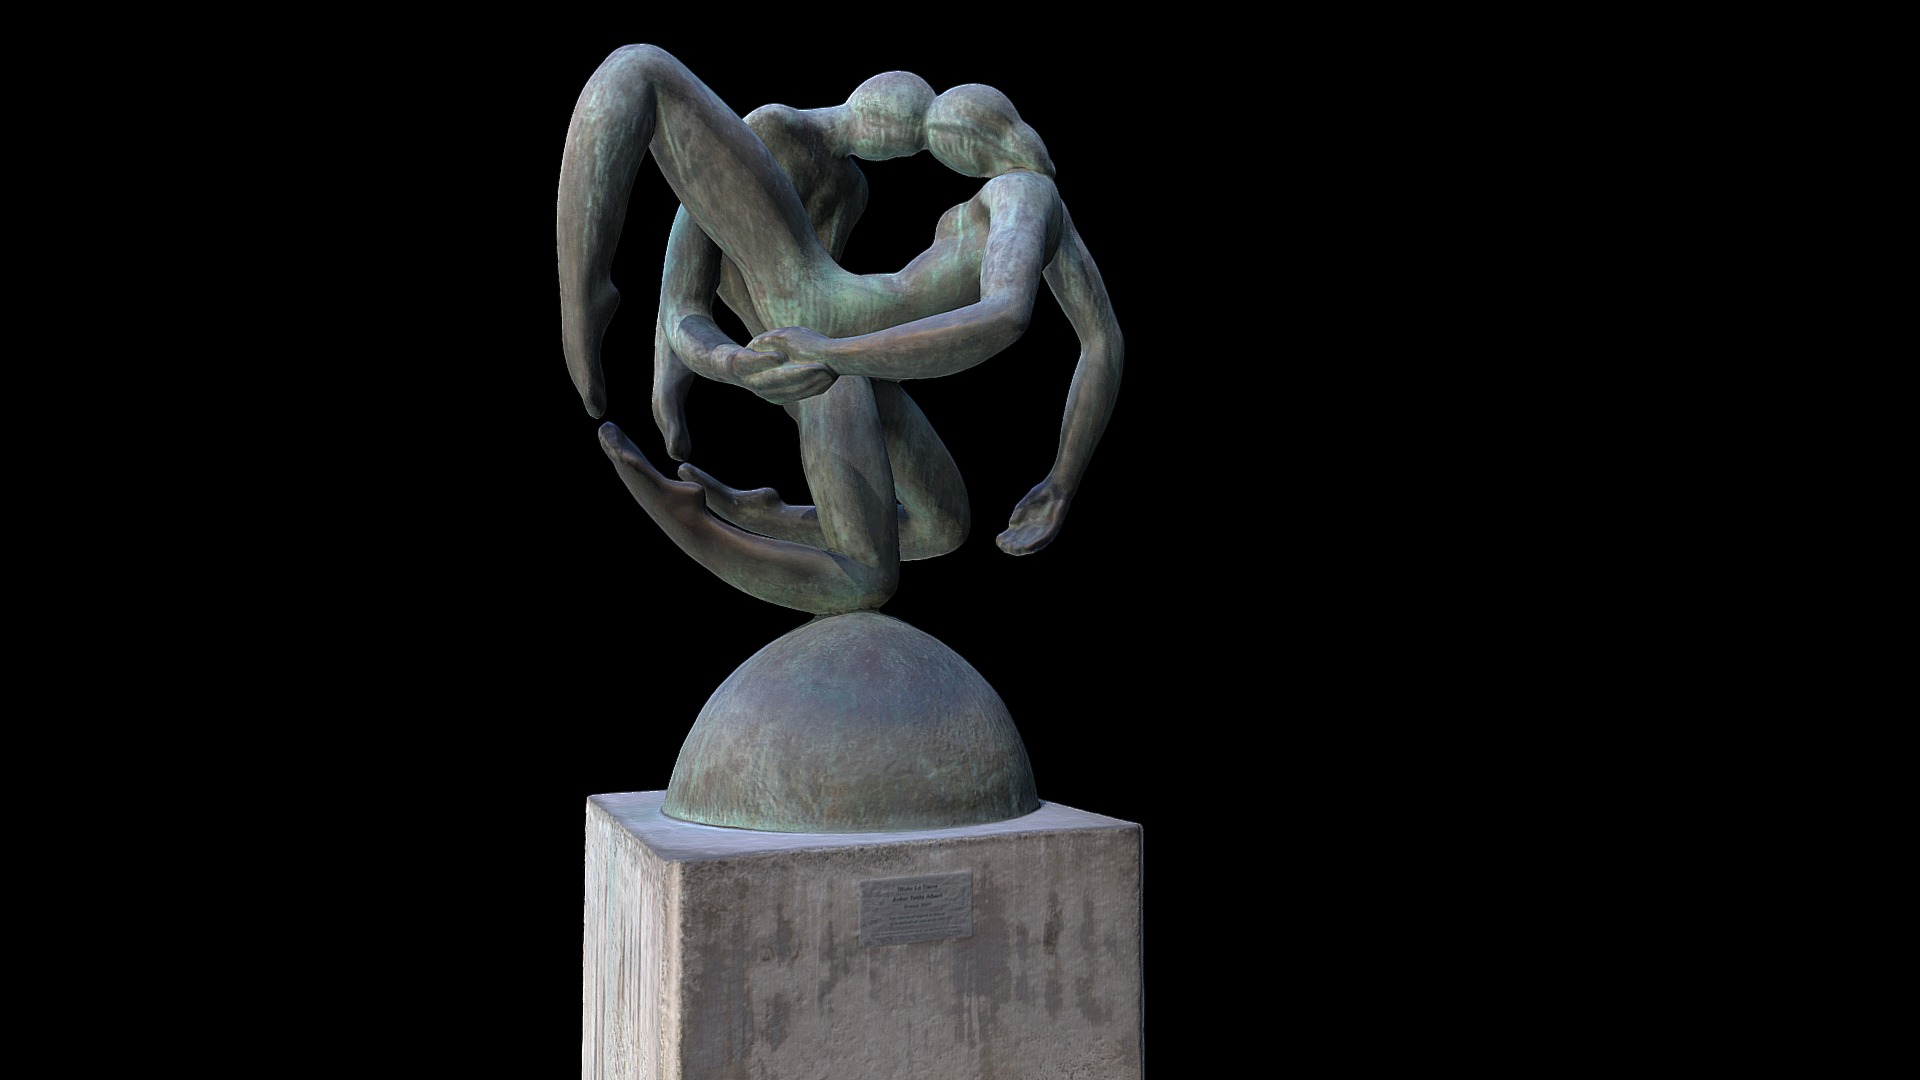 3D model 2018-06 – Santiago – Sculpture 18 - This is a 3D model of the 2018-06 - Santiago - Sculpture 18. The 3D model is about a statue of a person holding a ball.